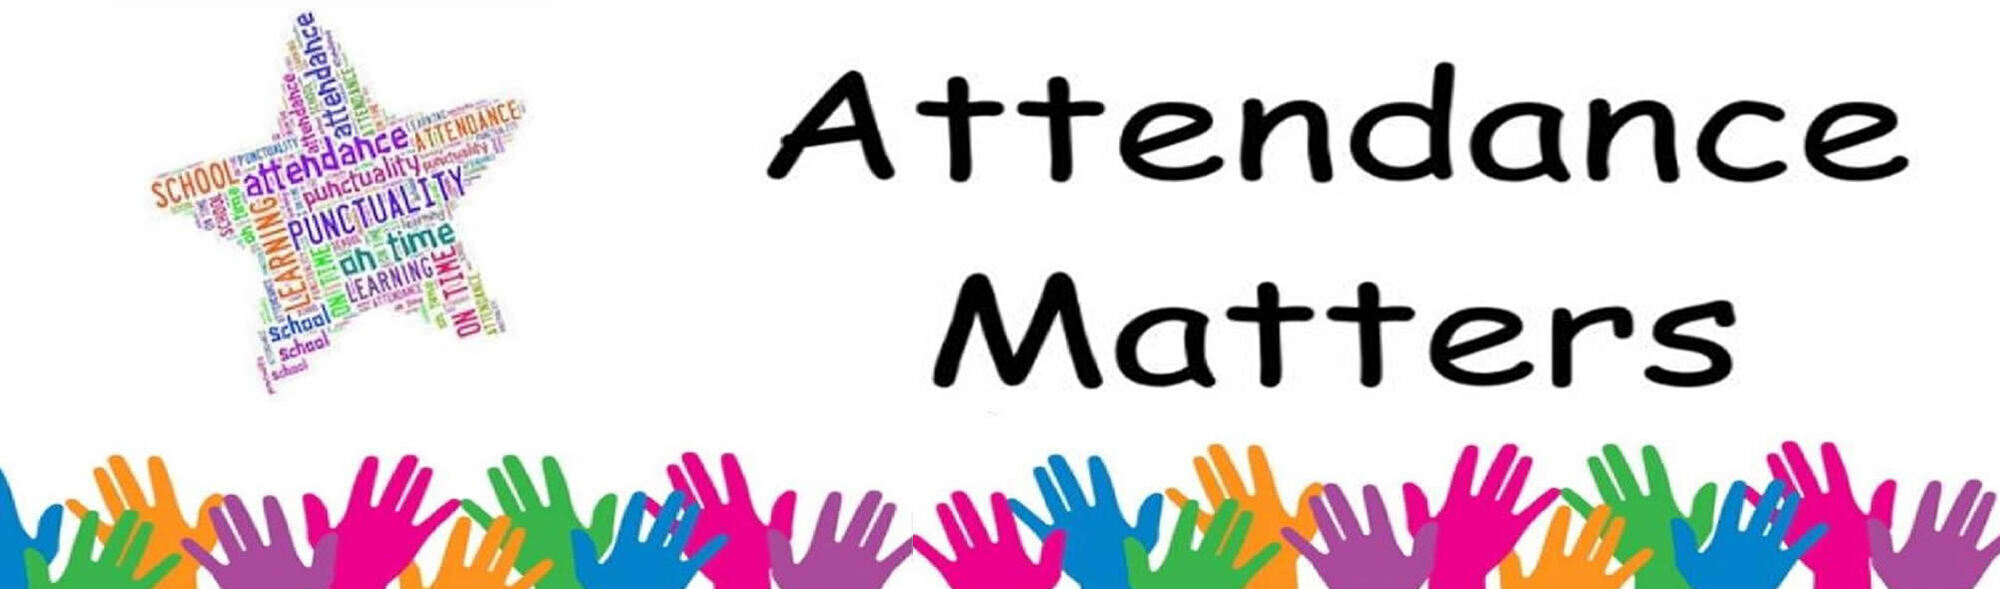 Why does attendance matter?<br/>Regular attendance fosters a classroom community between teachers and children. Students who attend school are more likely to succeed academically. Students gain background knowledge from discussions while learning in school. Attending school also provides time for social interactions with peers.